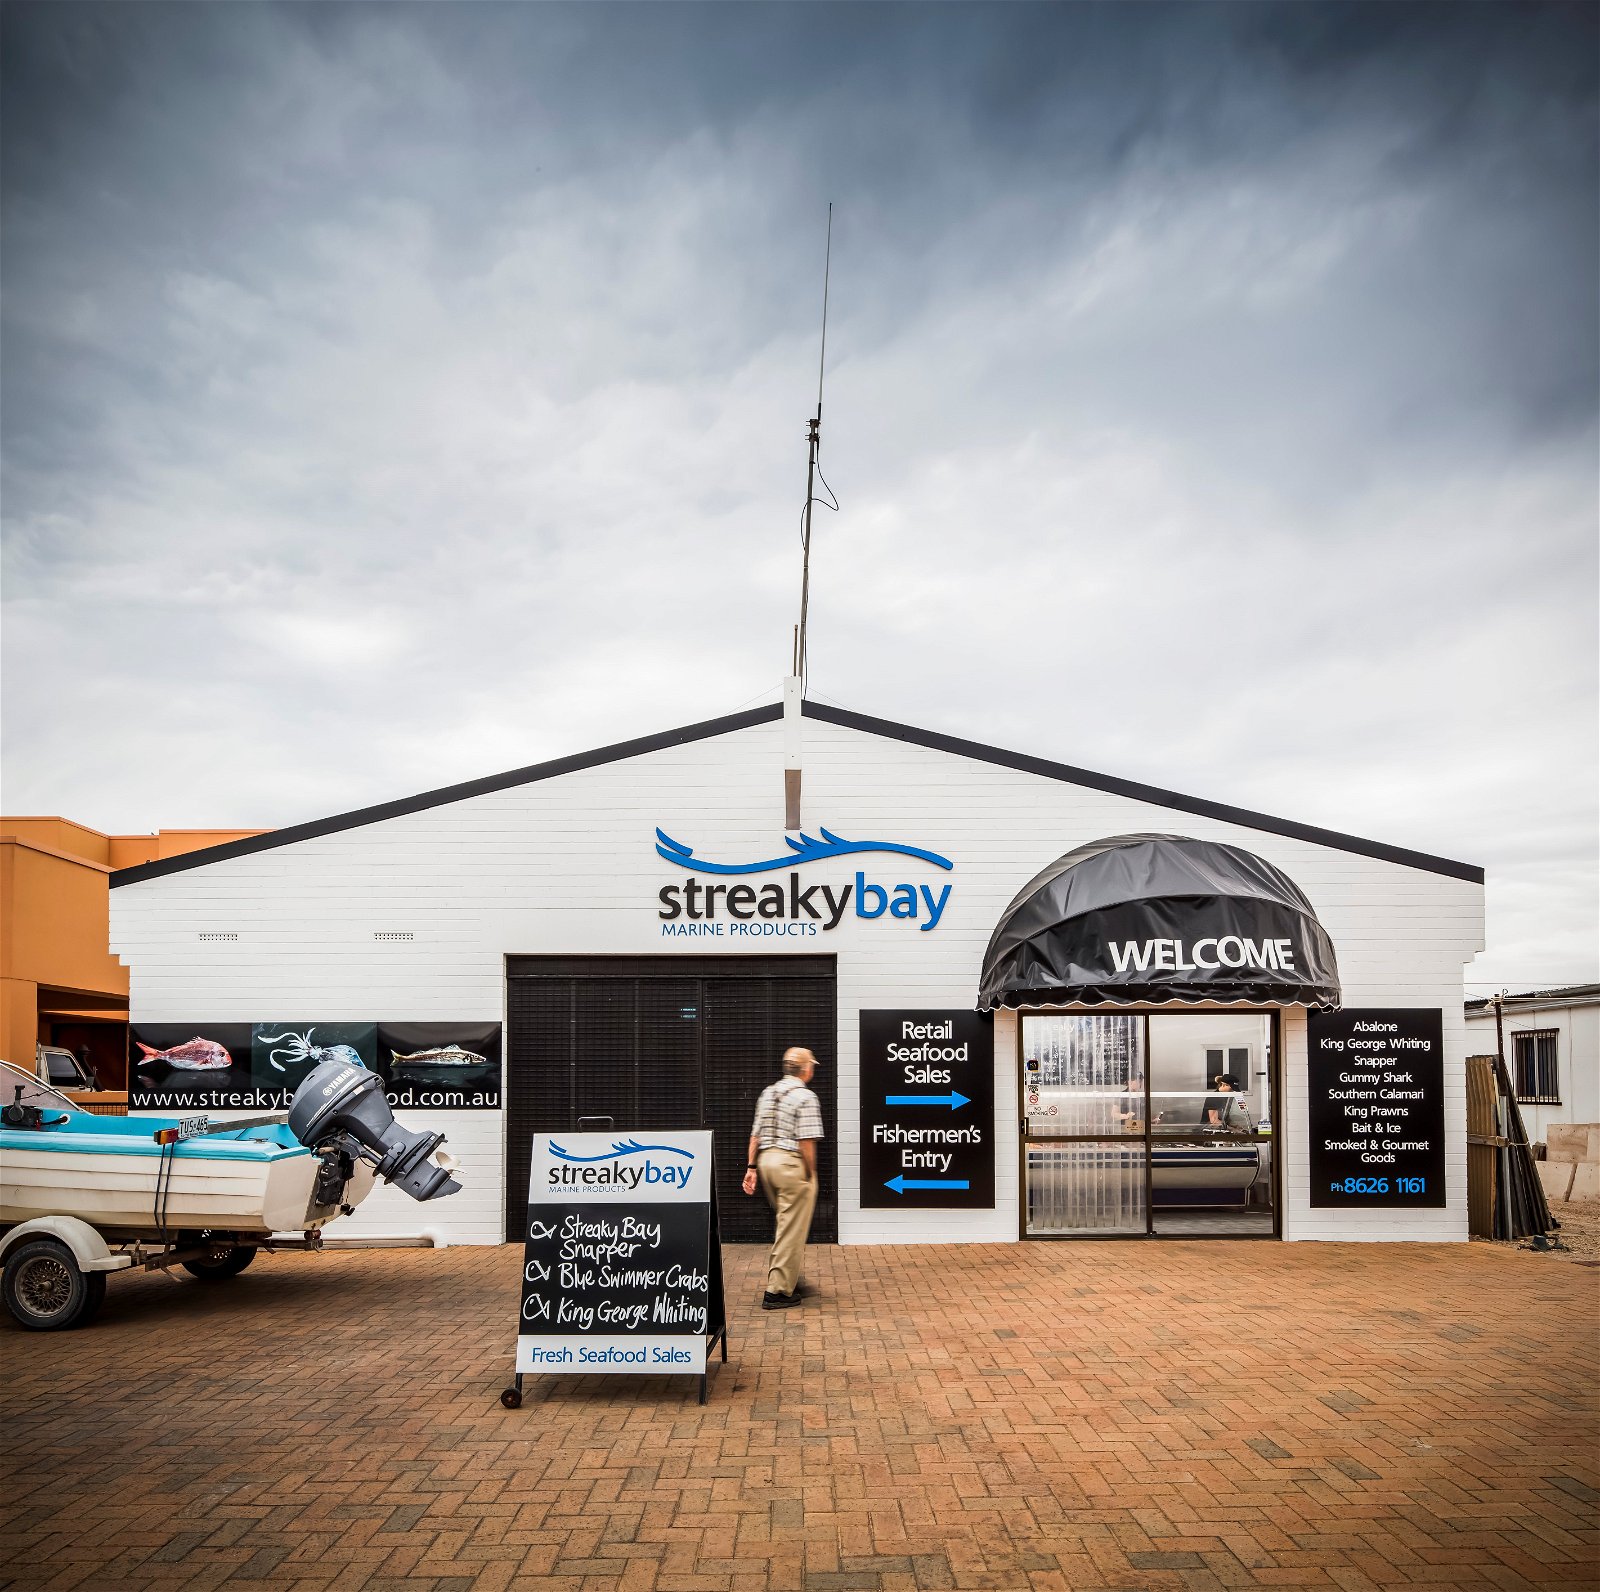 Streaky Bay Marine Products - Broome Tourism